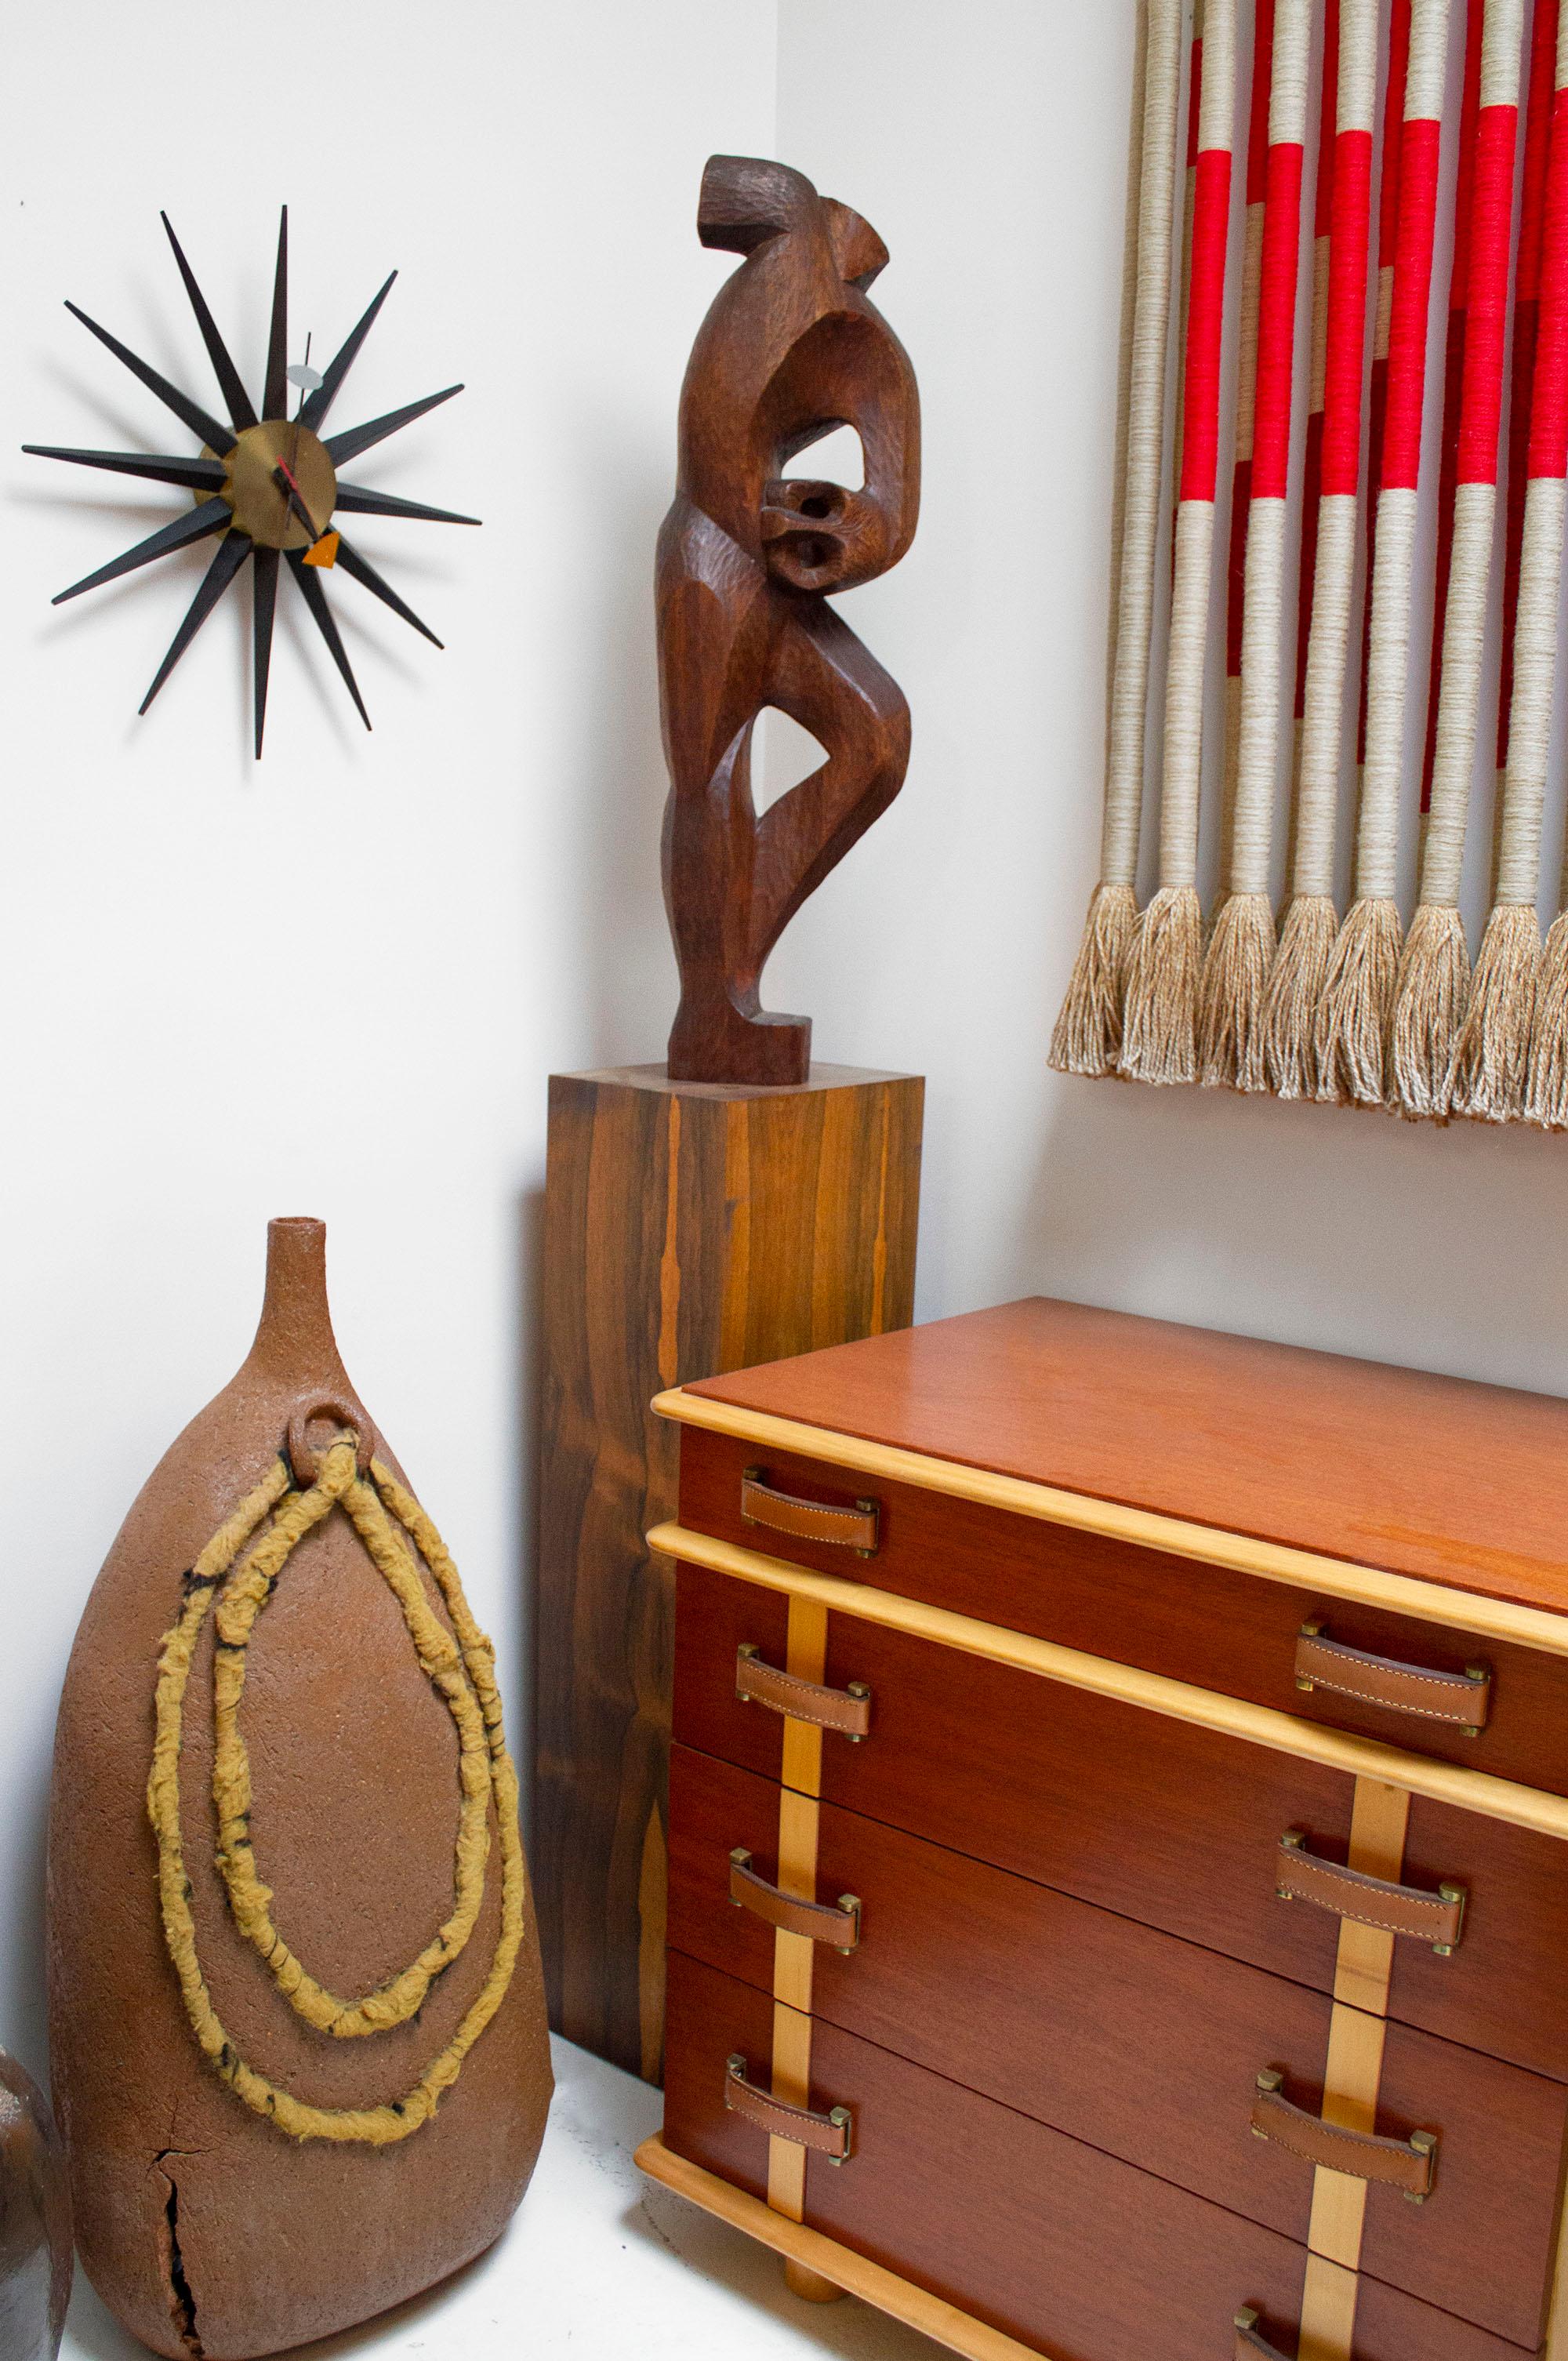 Figurative modernist hand-carved mahogany sculpture purchased in Brazil in the 1950s. Signed to the bottom rear edge. Brazilian rosewood plinth base included. The plinth can be refinished at the buyer's request.

Sculpture measures: 35.5